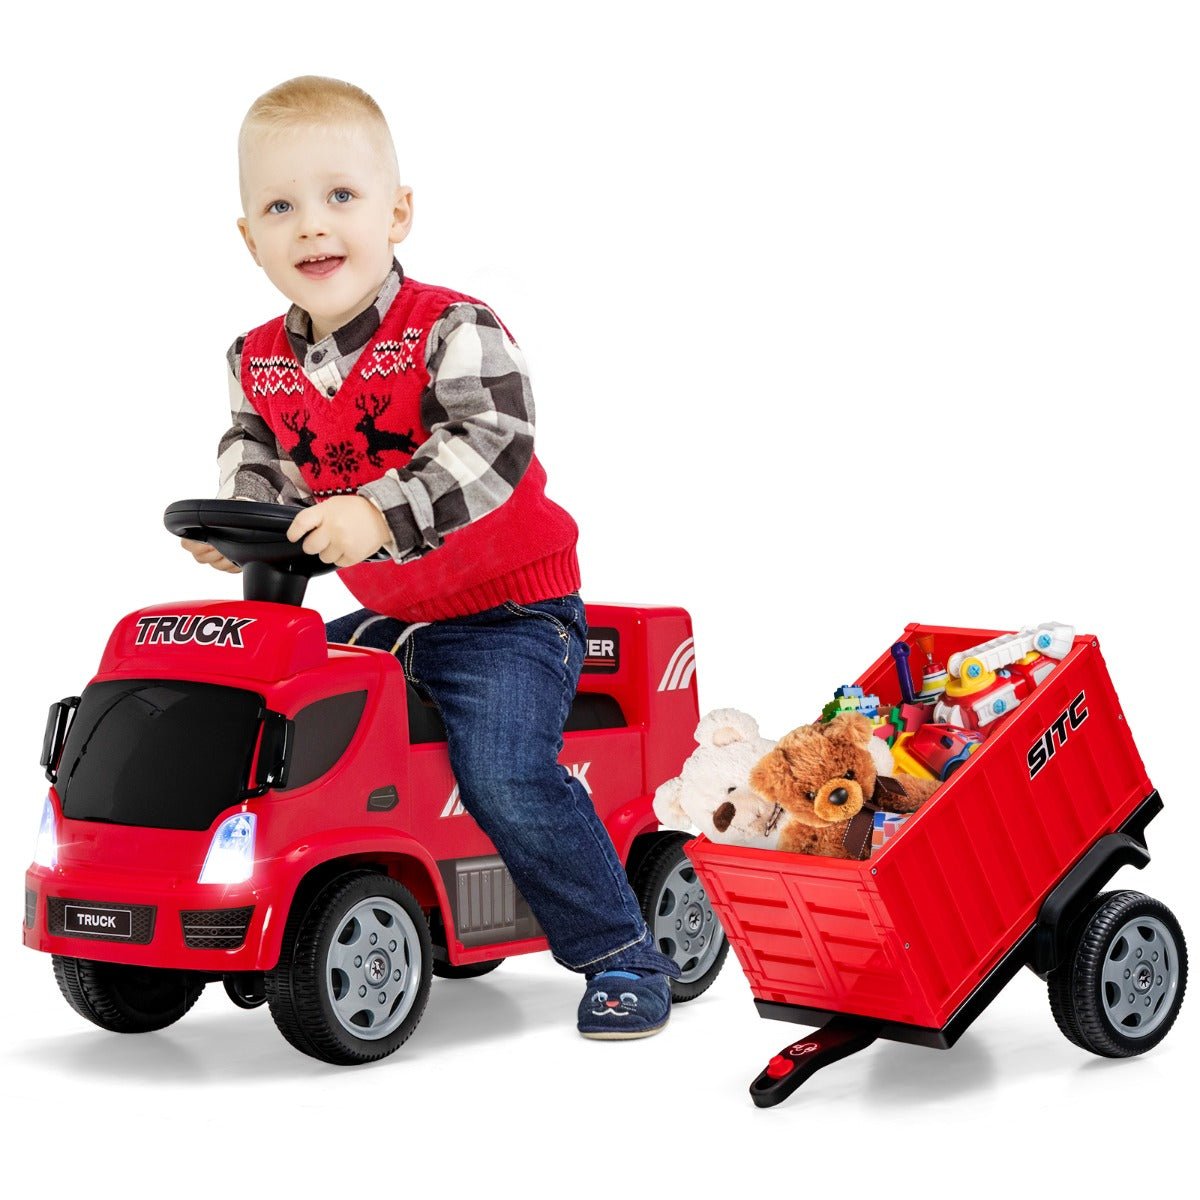 Buy a Fun and Functional Red Ride On Truck in Australia